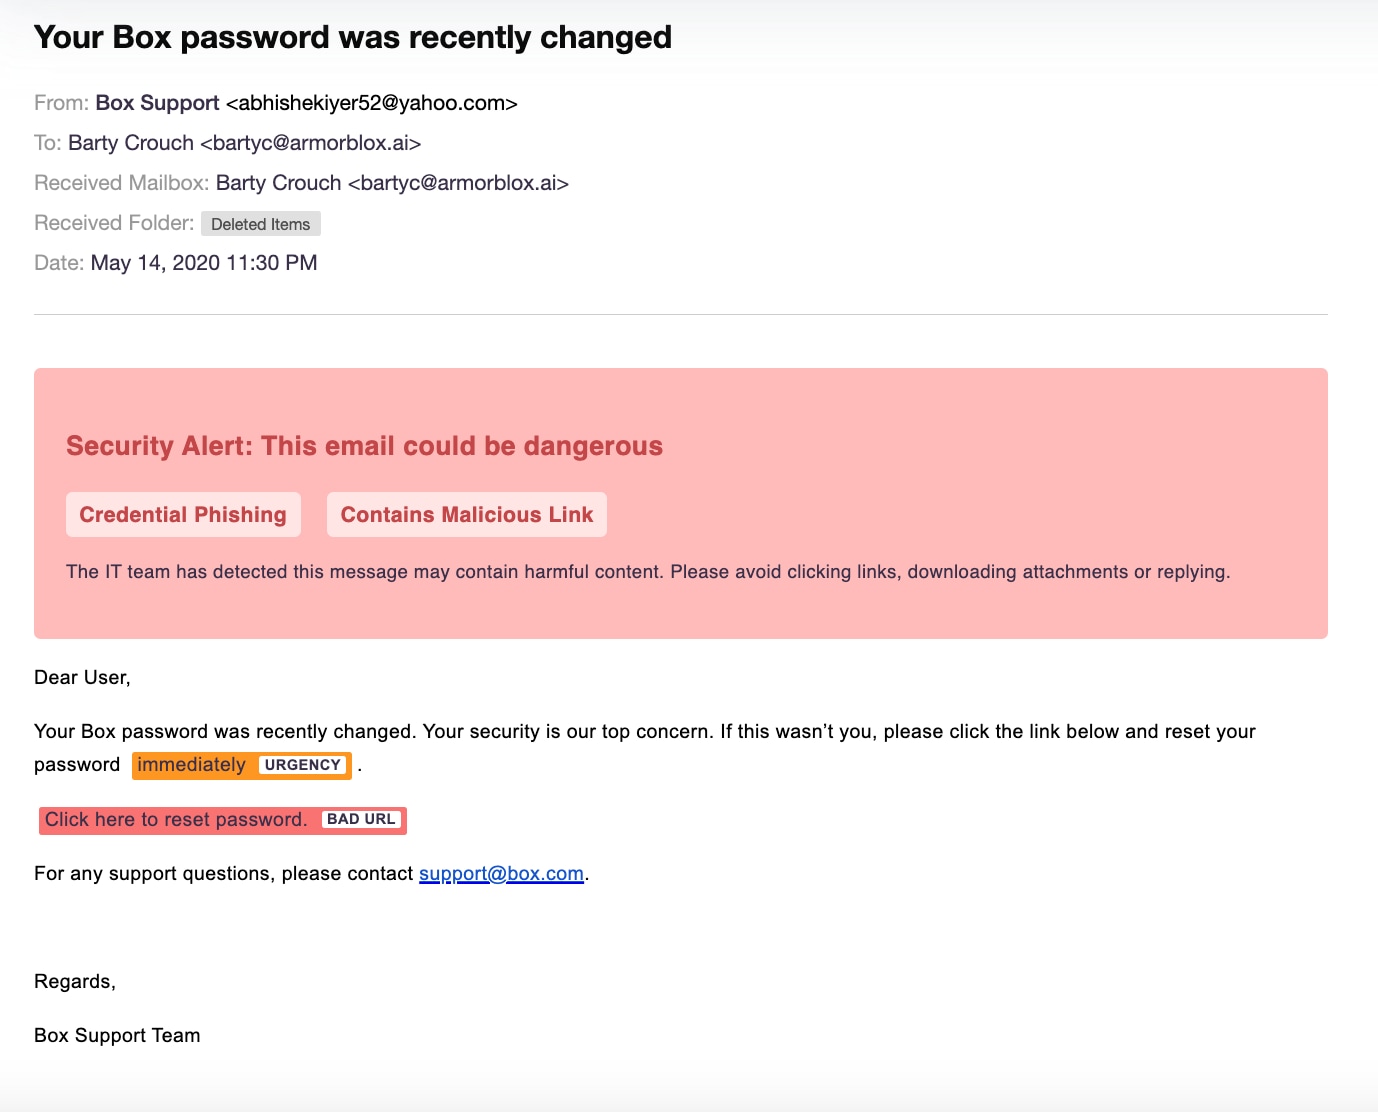 Mass hack attack on Yahoo Mail accounts prompts password reset